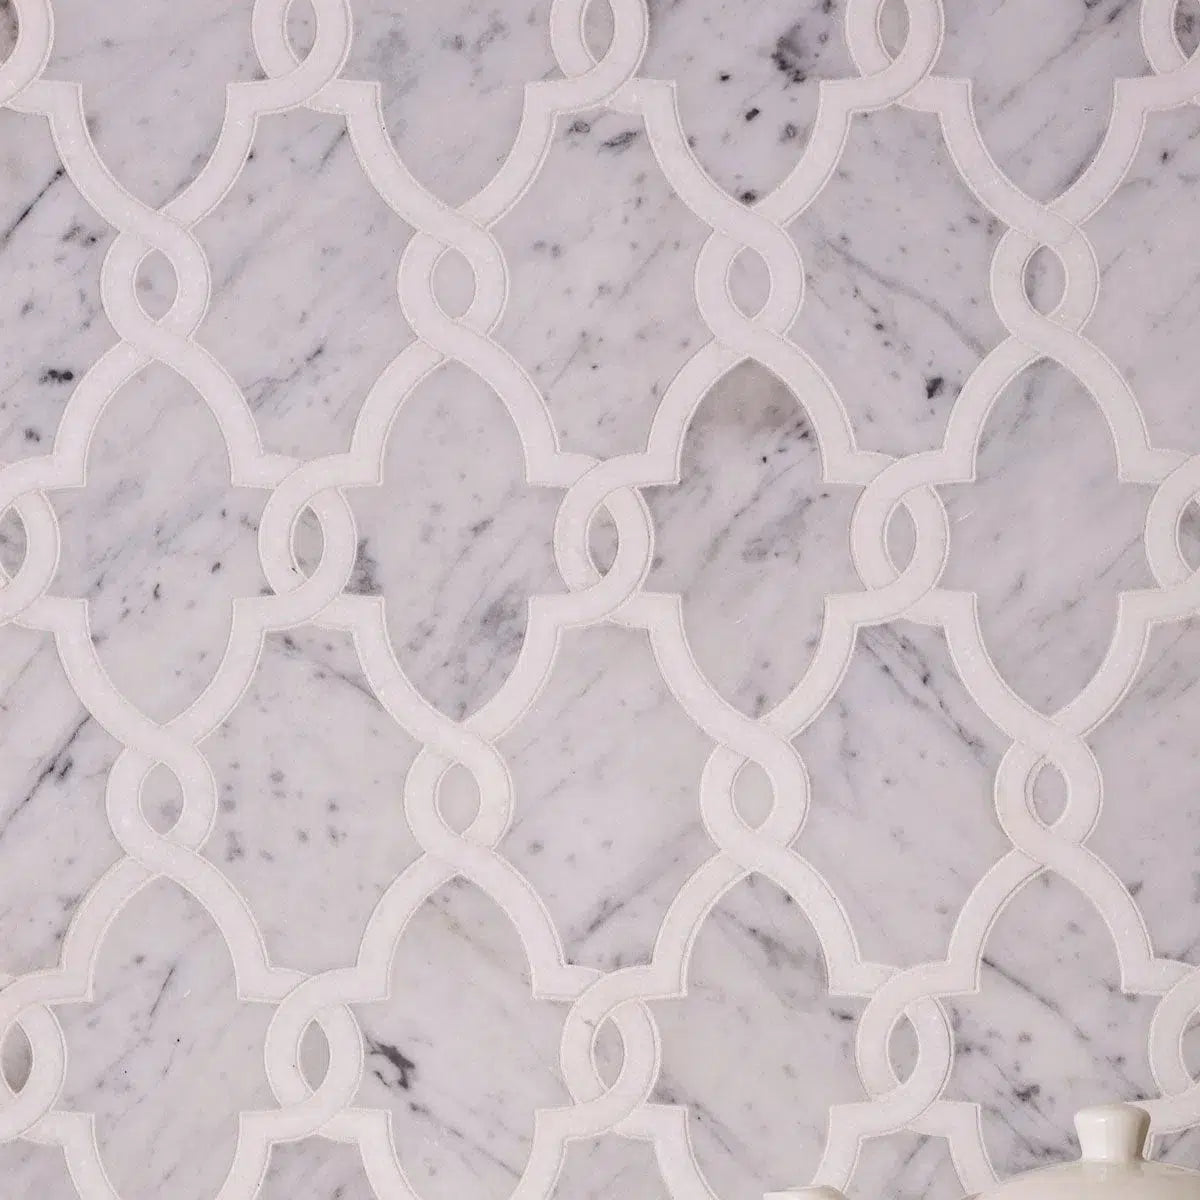 Gray and White marble patterned tile for a traditional kitchen backsplash